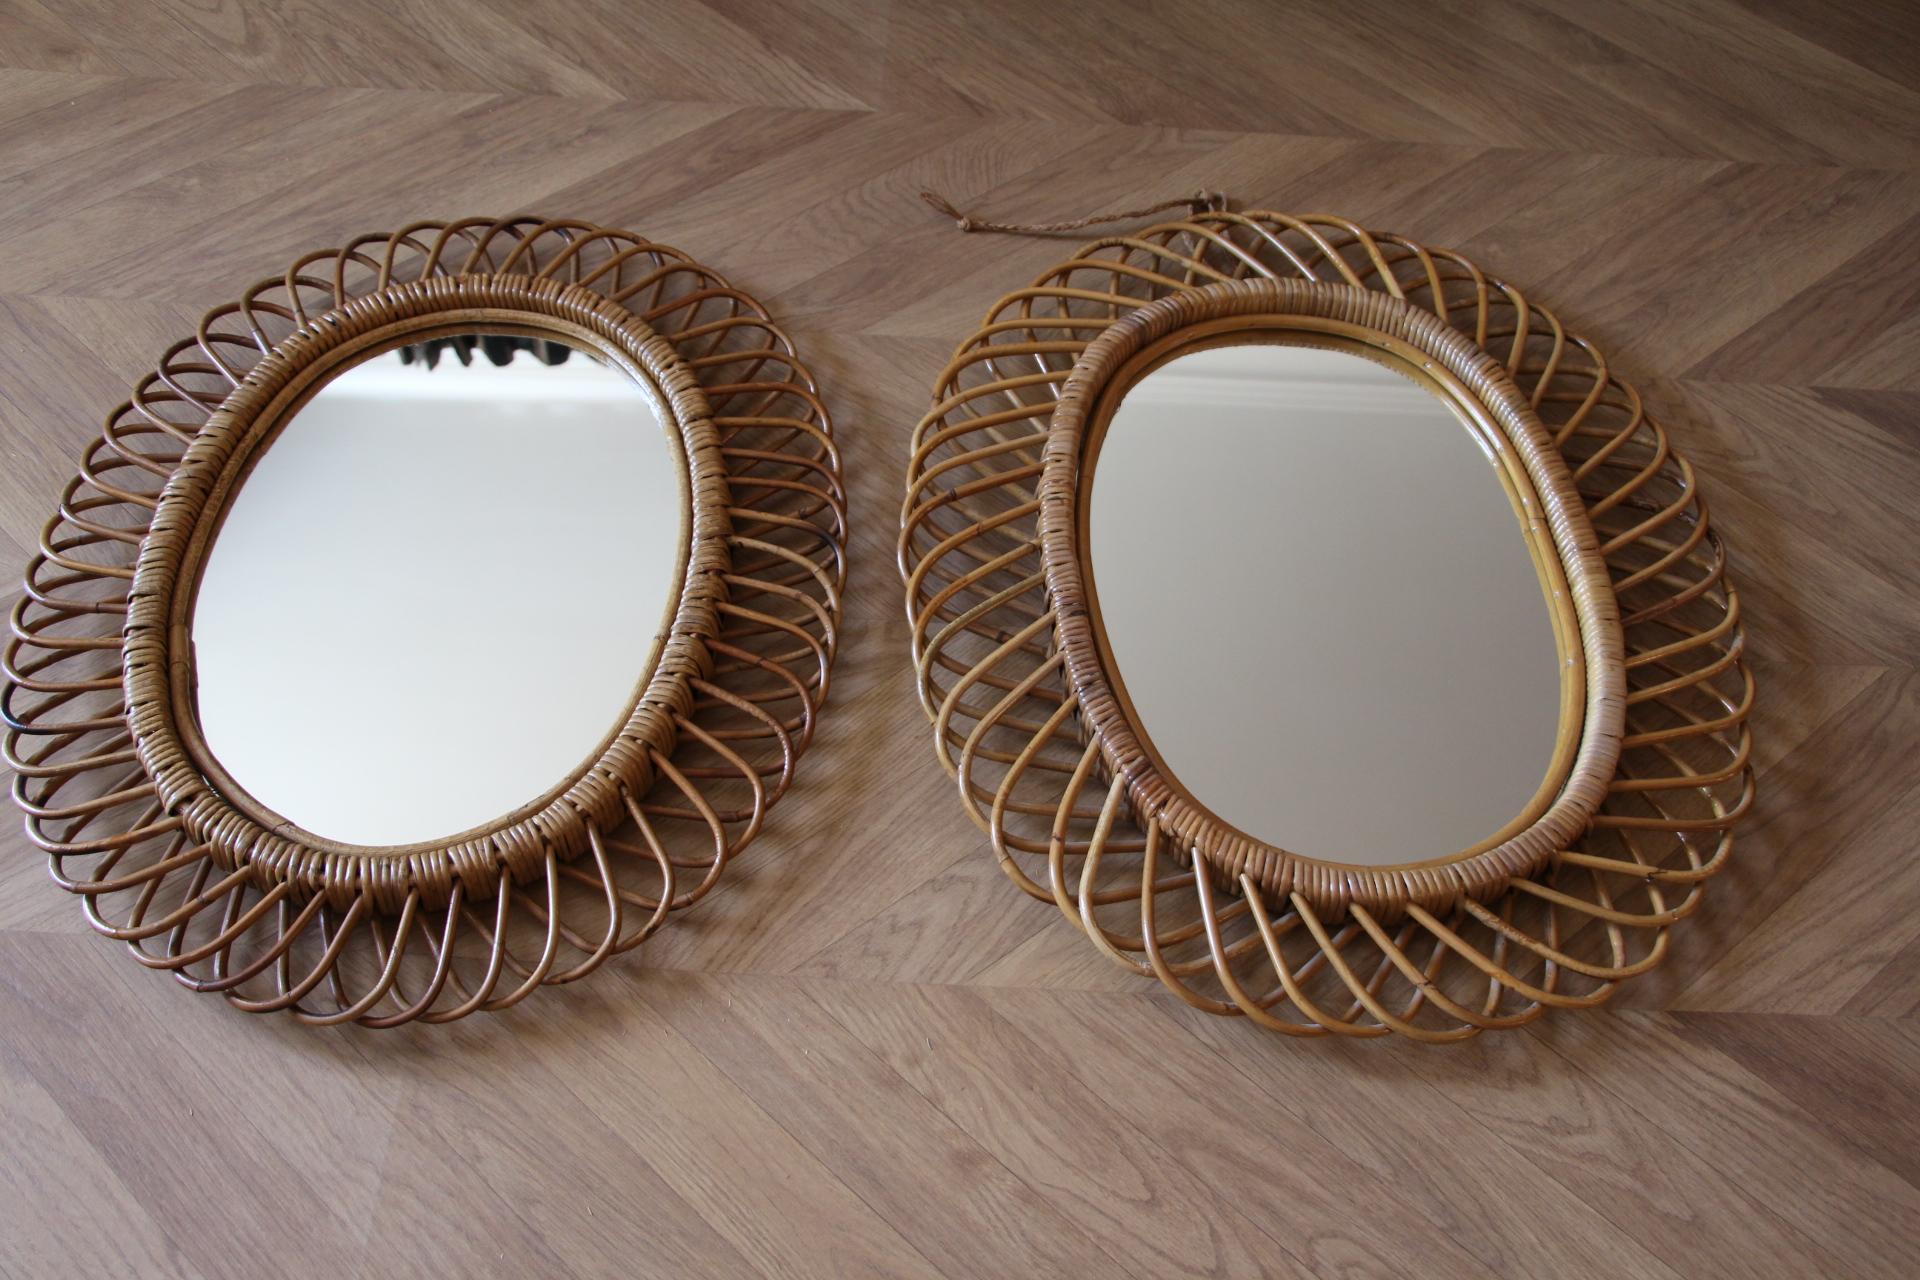 These very decorative mirrors were made in Italy in 1960s.It is very unusual to find a pair.Pleasenote that although, it is a pair, they are slightly different one from the other, which is natural as they have been made entirely by hand... They are